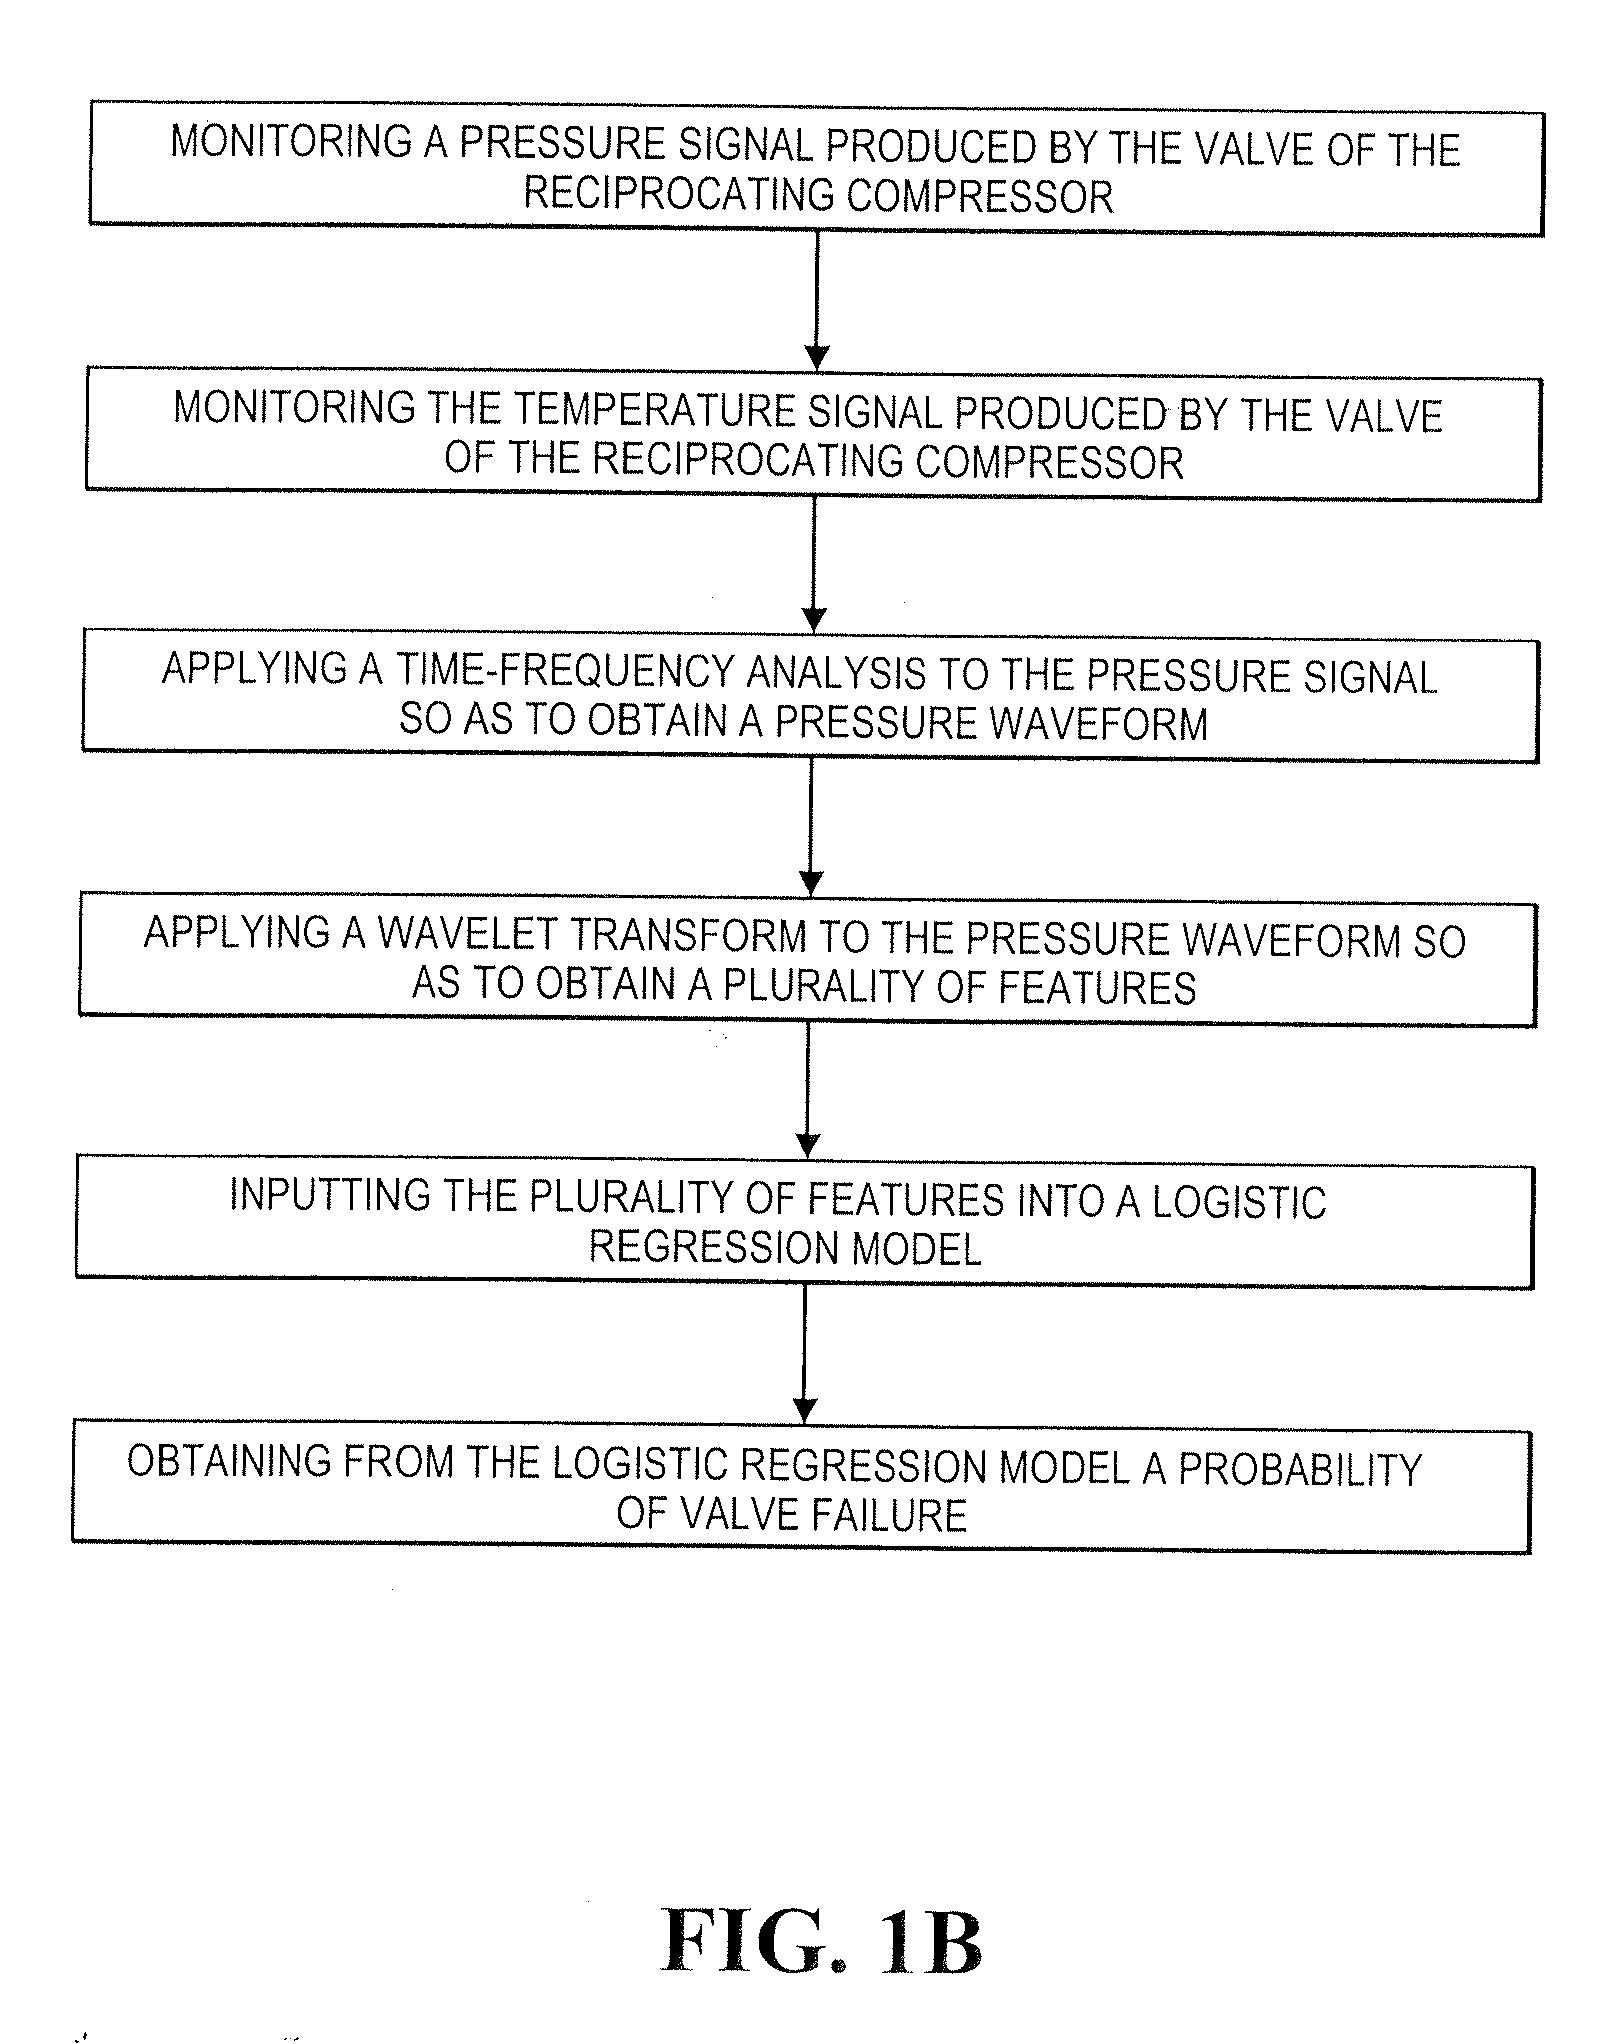 Computer program and method for detecting and predicting valve failure in a reciprocating compressor